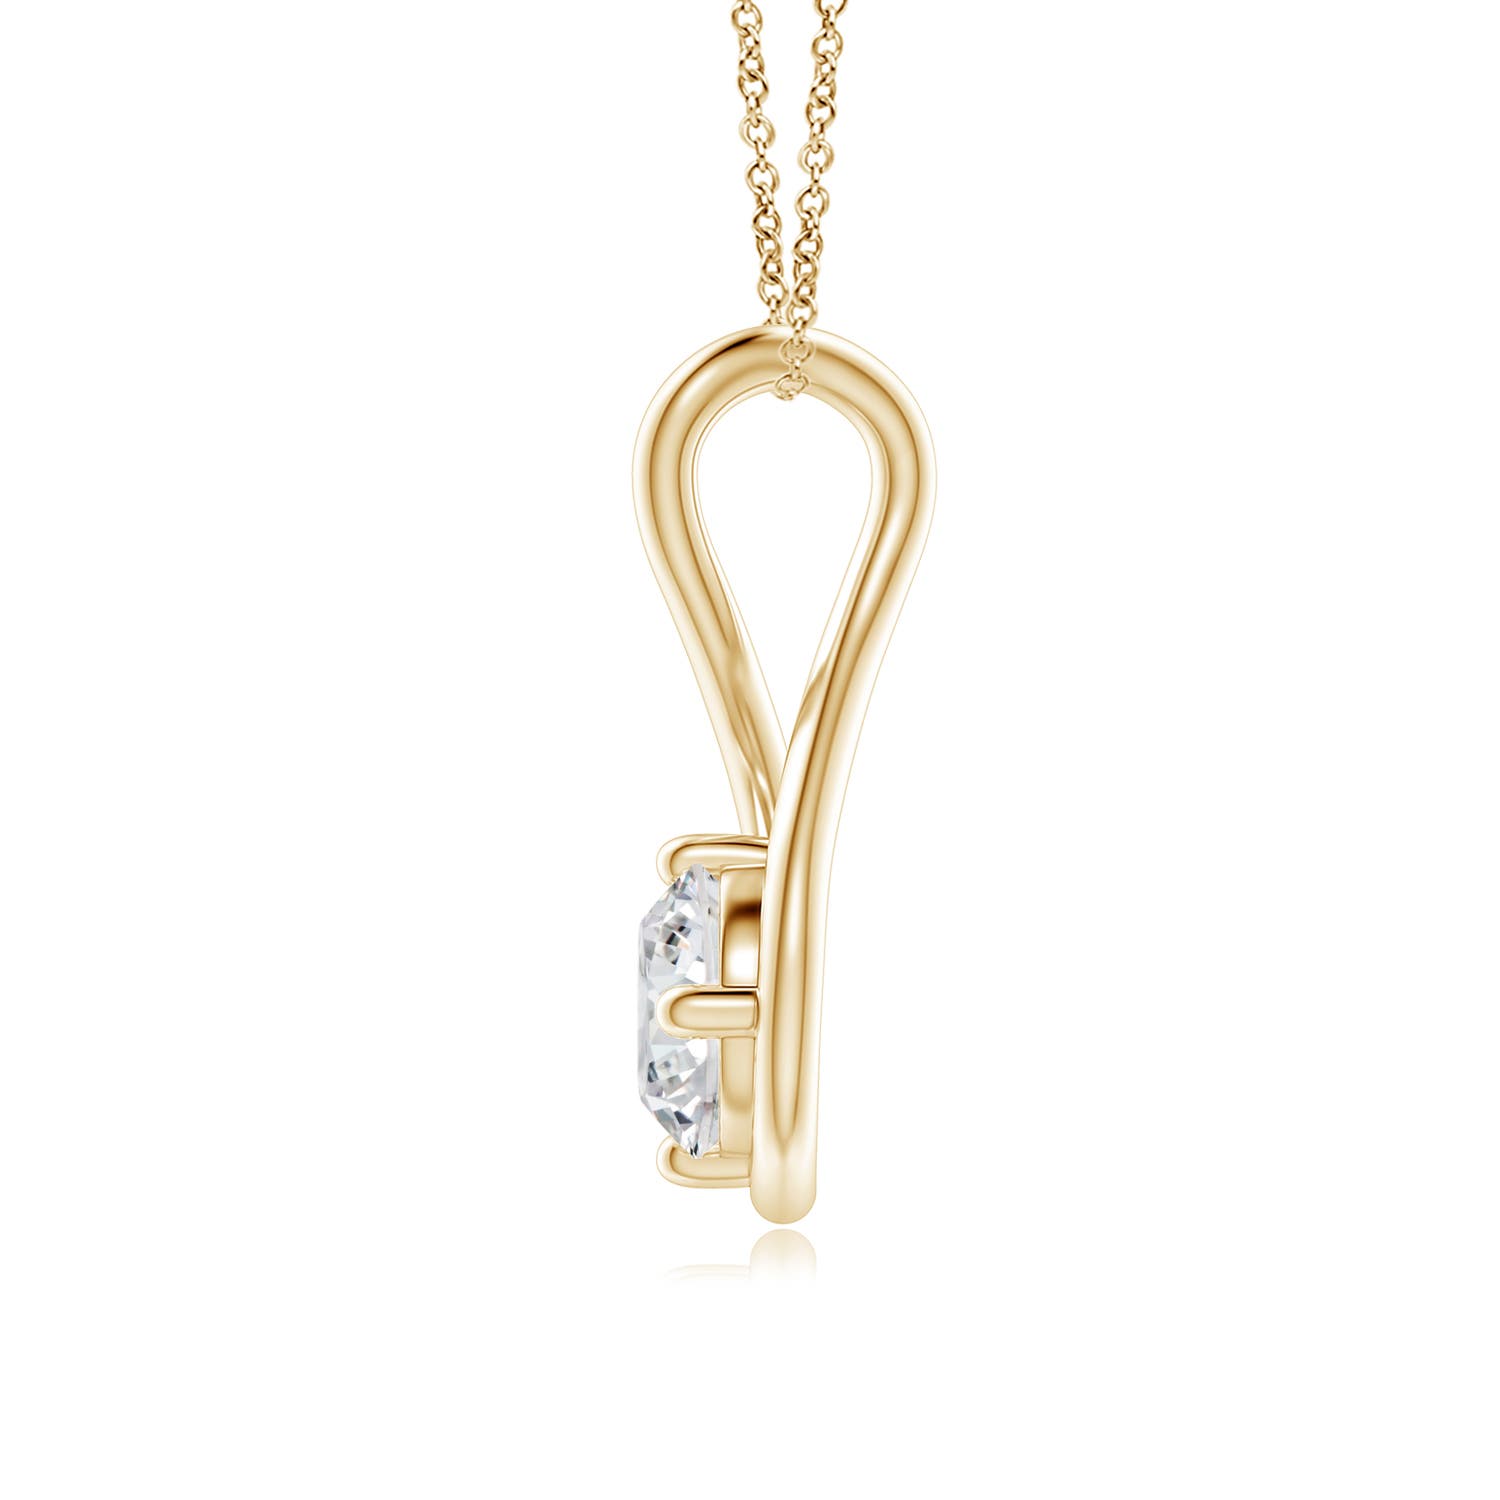 HSI2 / 0.39 CT / 14 KT Yellow Gold